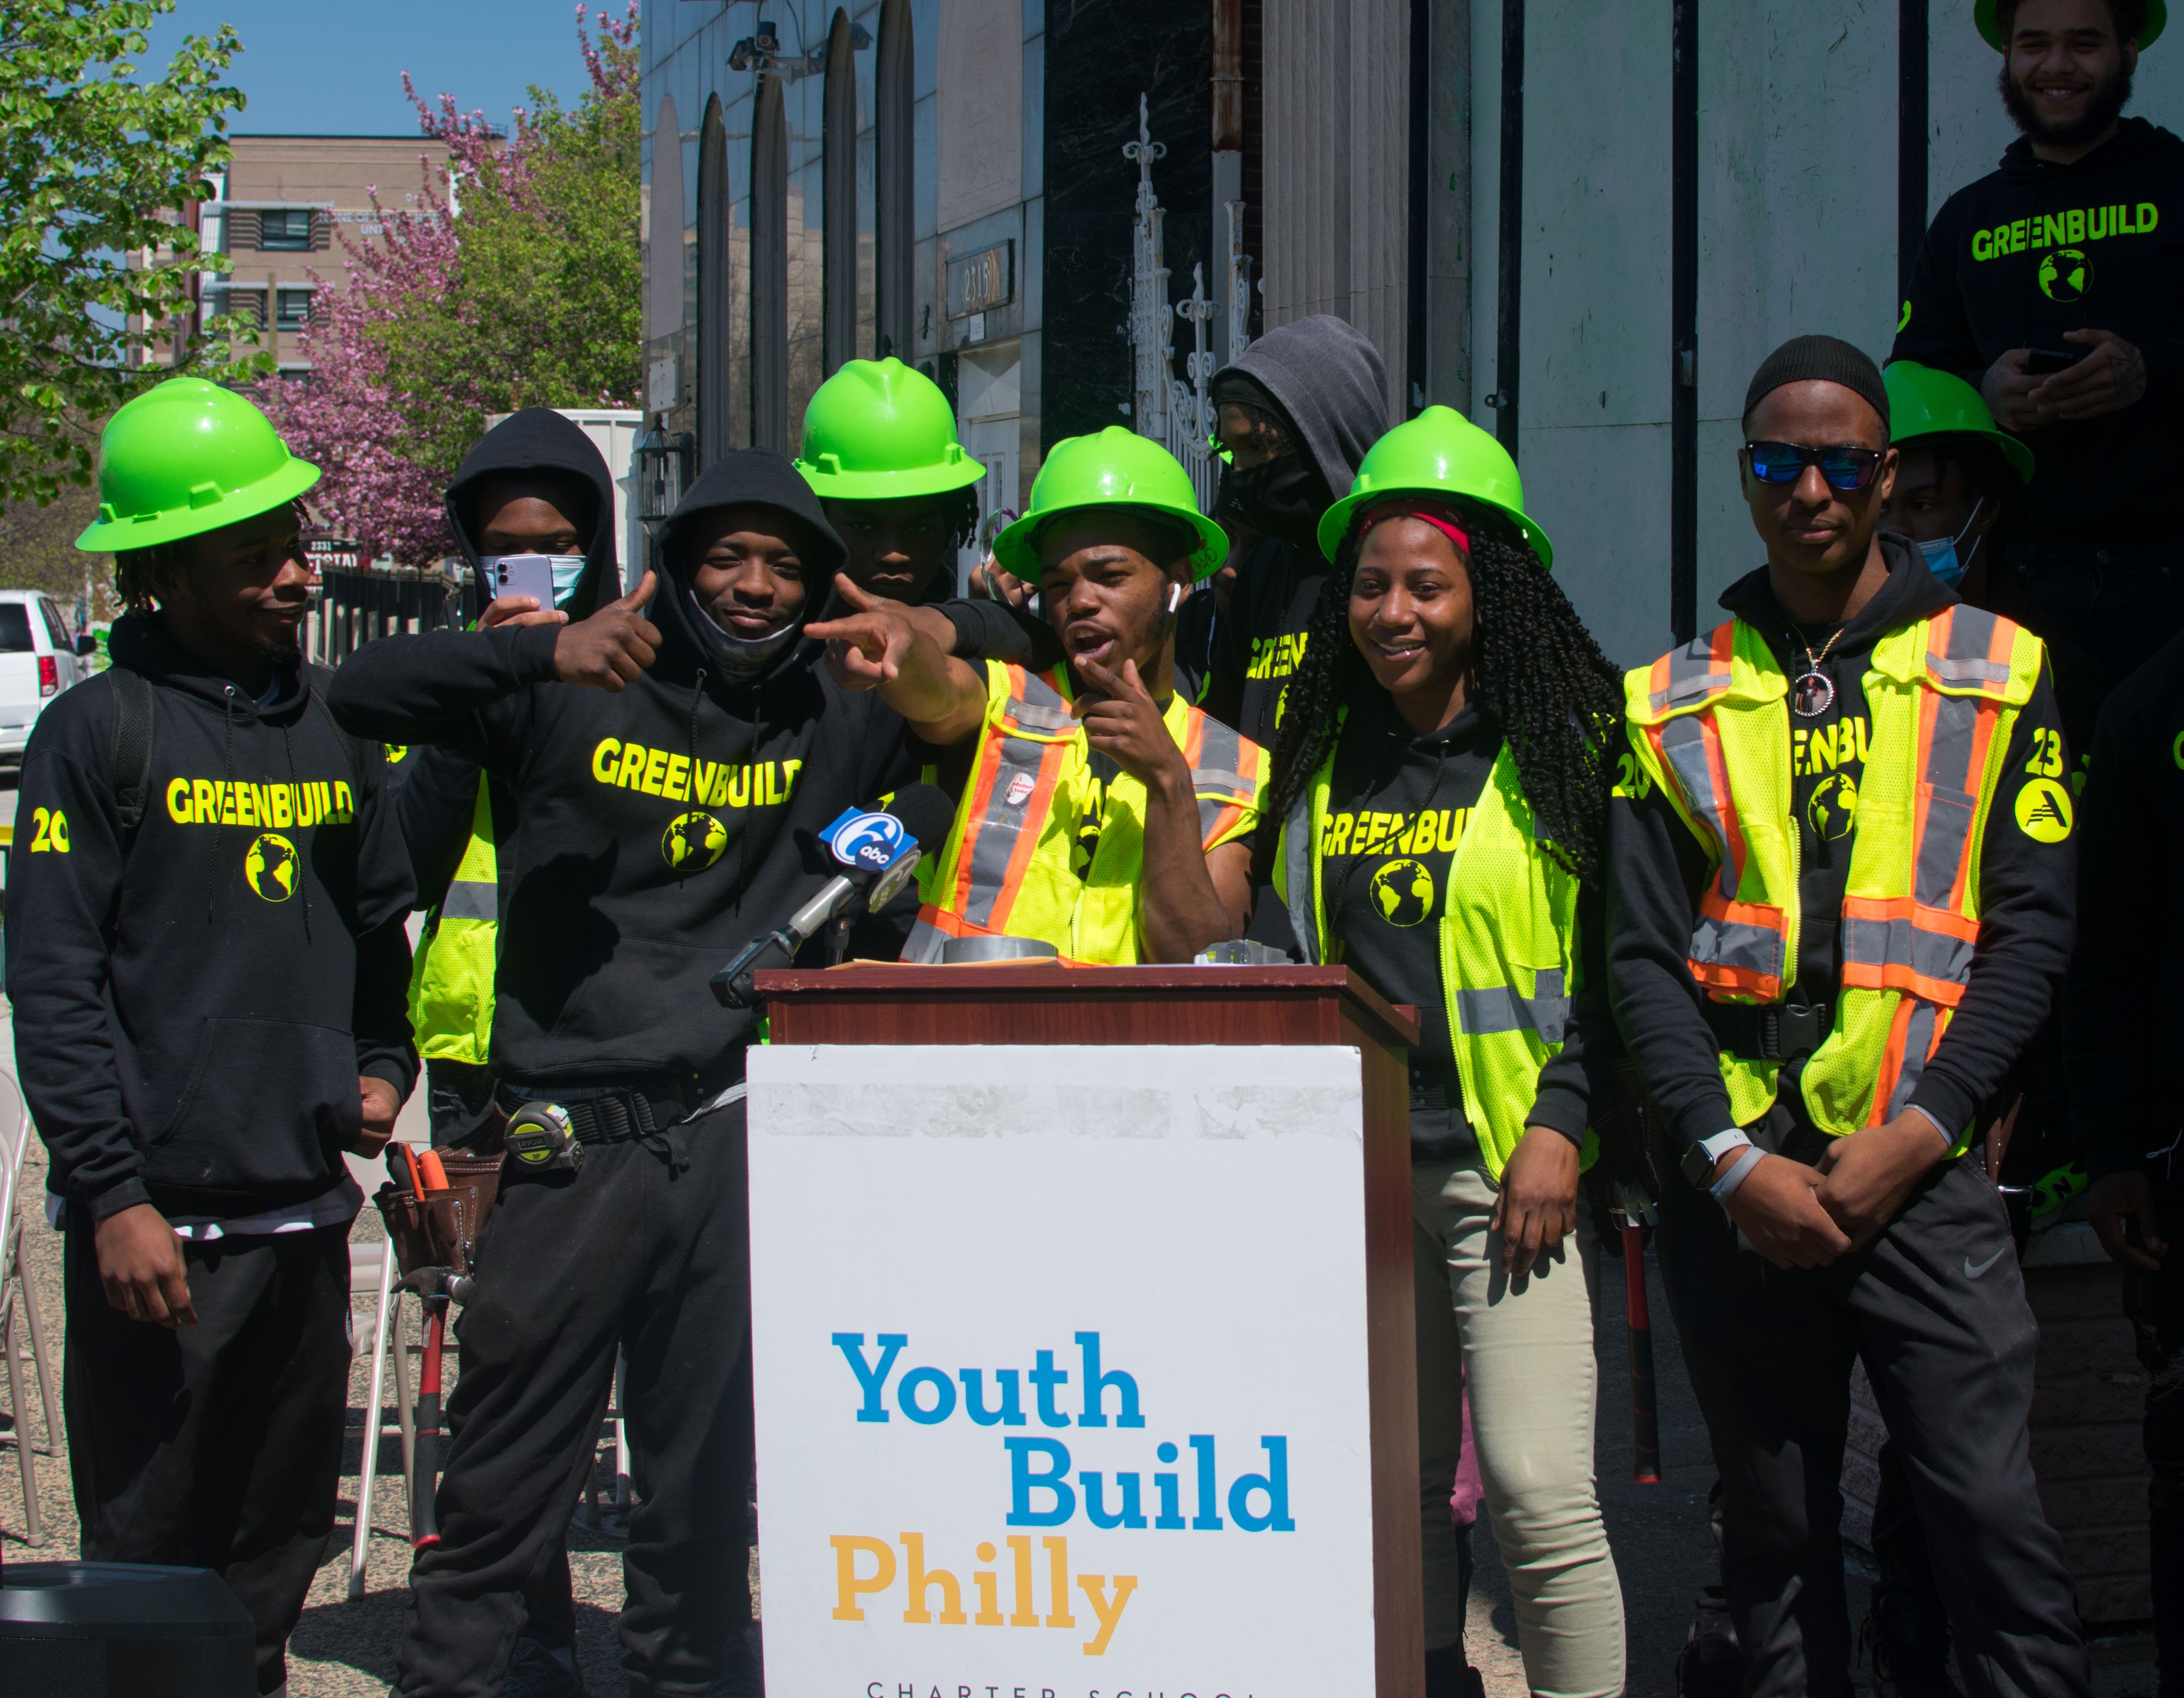 YouthBuild Philly Charter School holds Groundbreaking Ceremony for NEW $25 Million School Building Project in the heart of North Philly